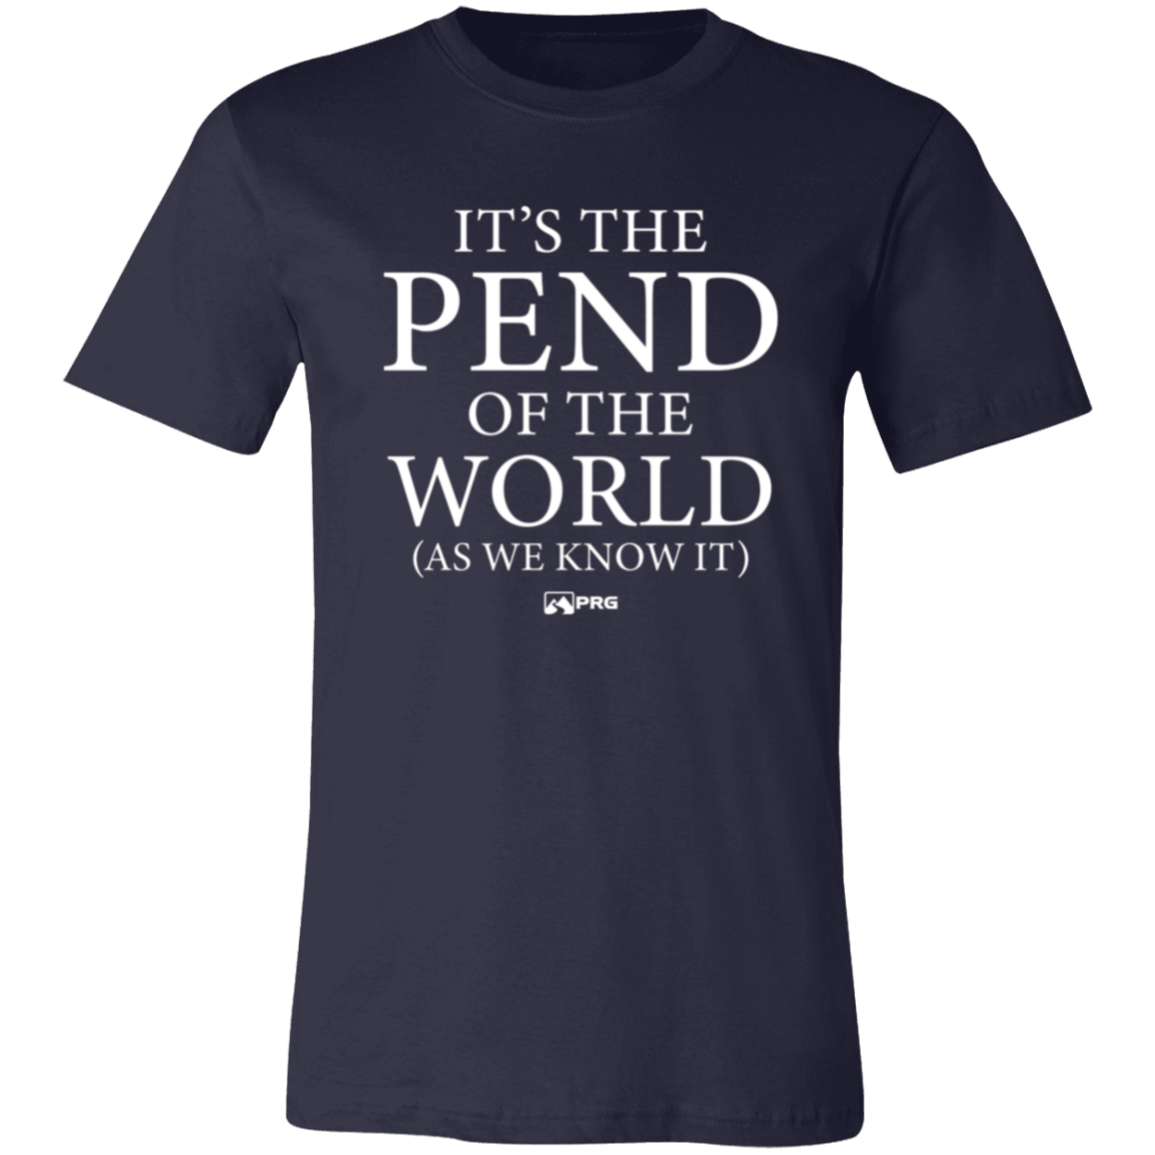 Pend of the World - Shirt